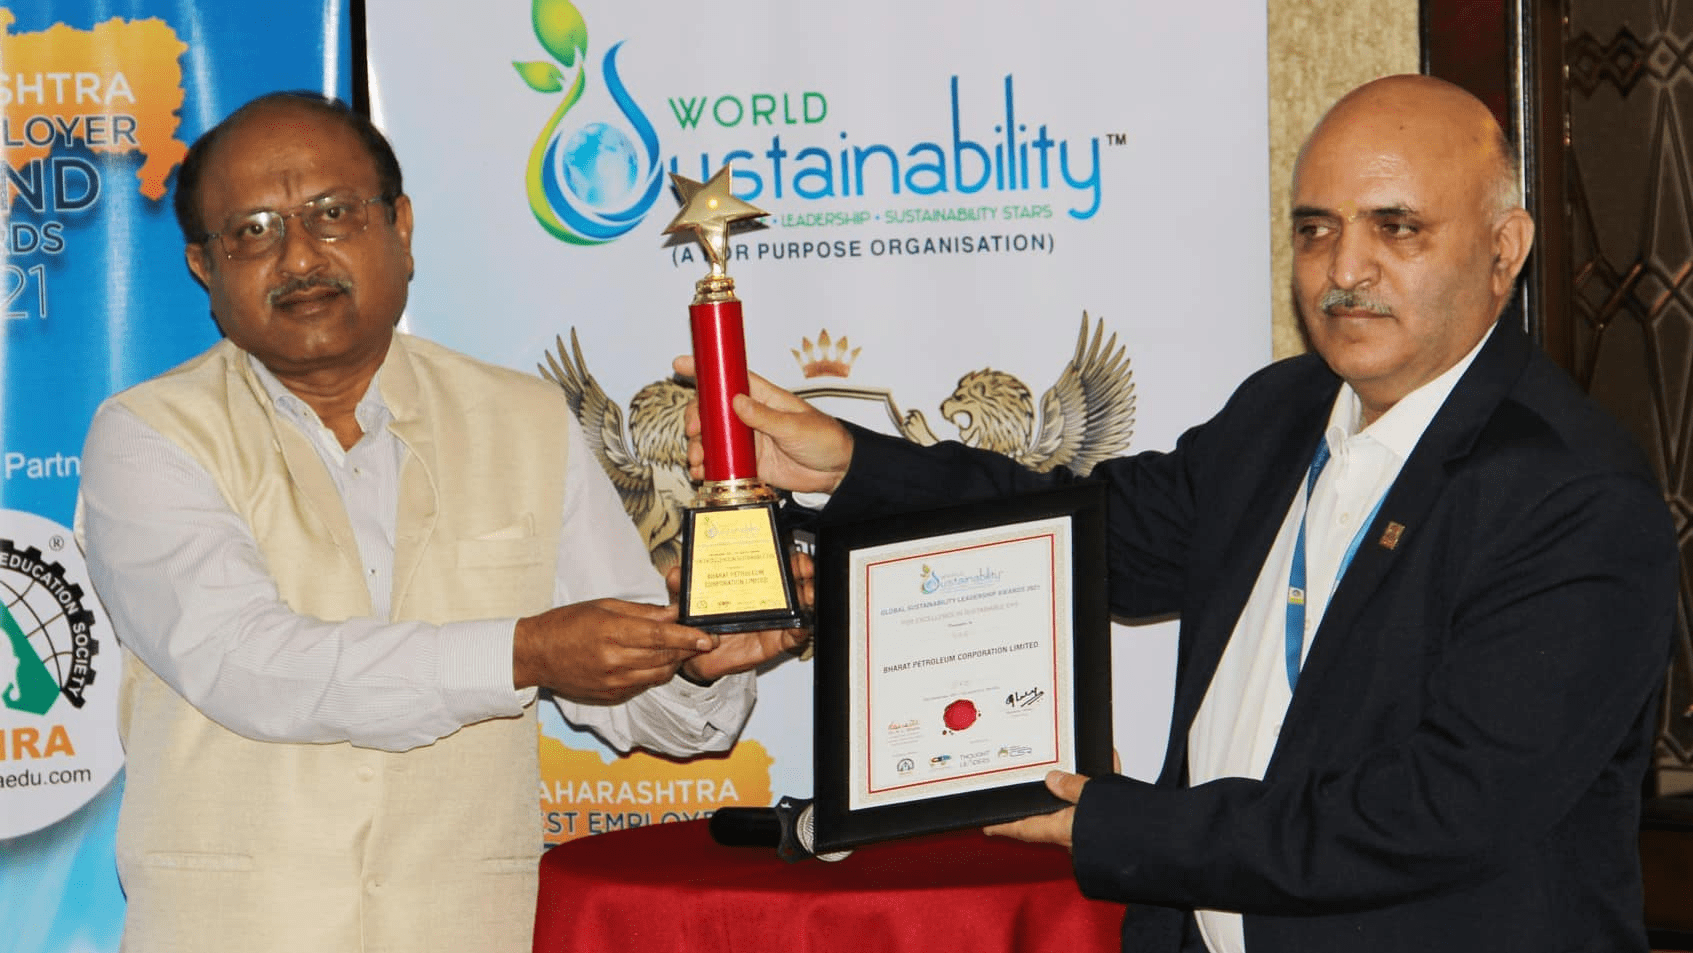 Certificate on Excellence in Sustainable EHS  at the World Sustainability Congress given to BPCL